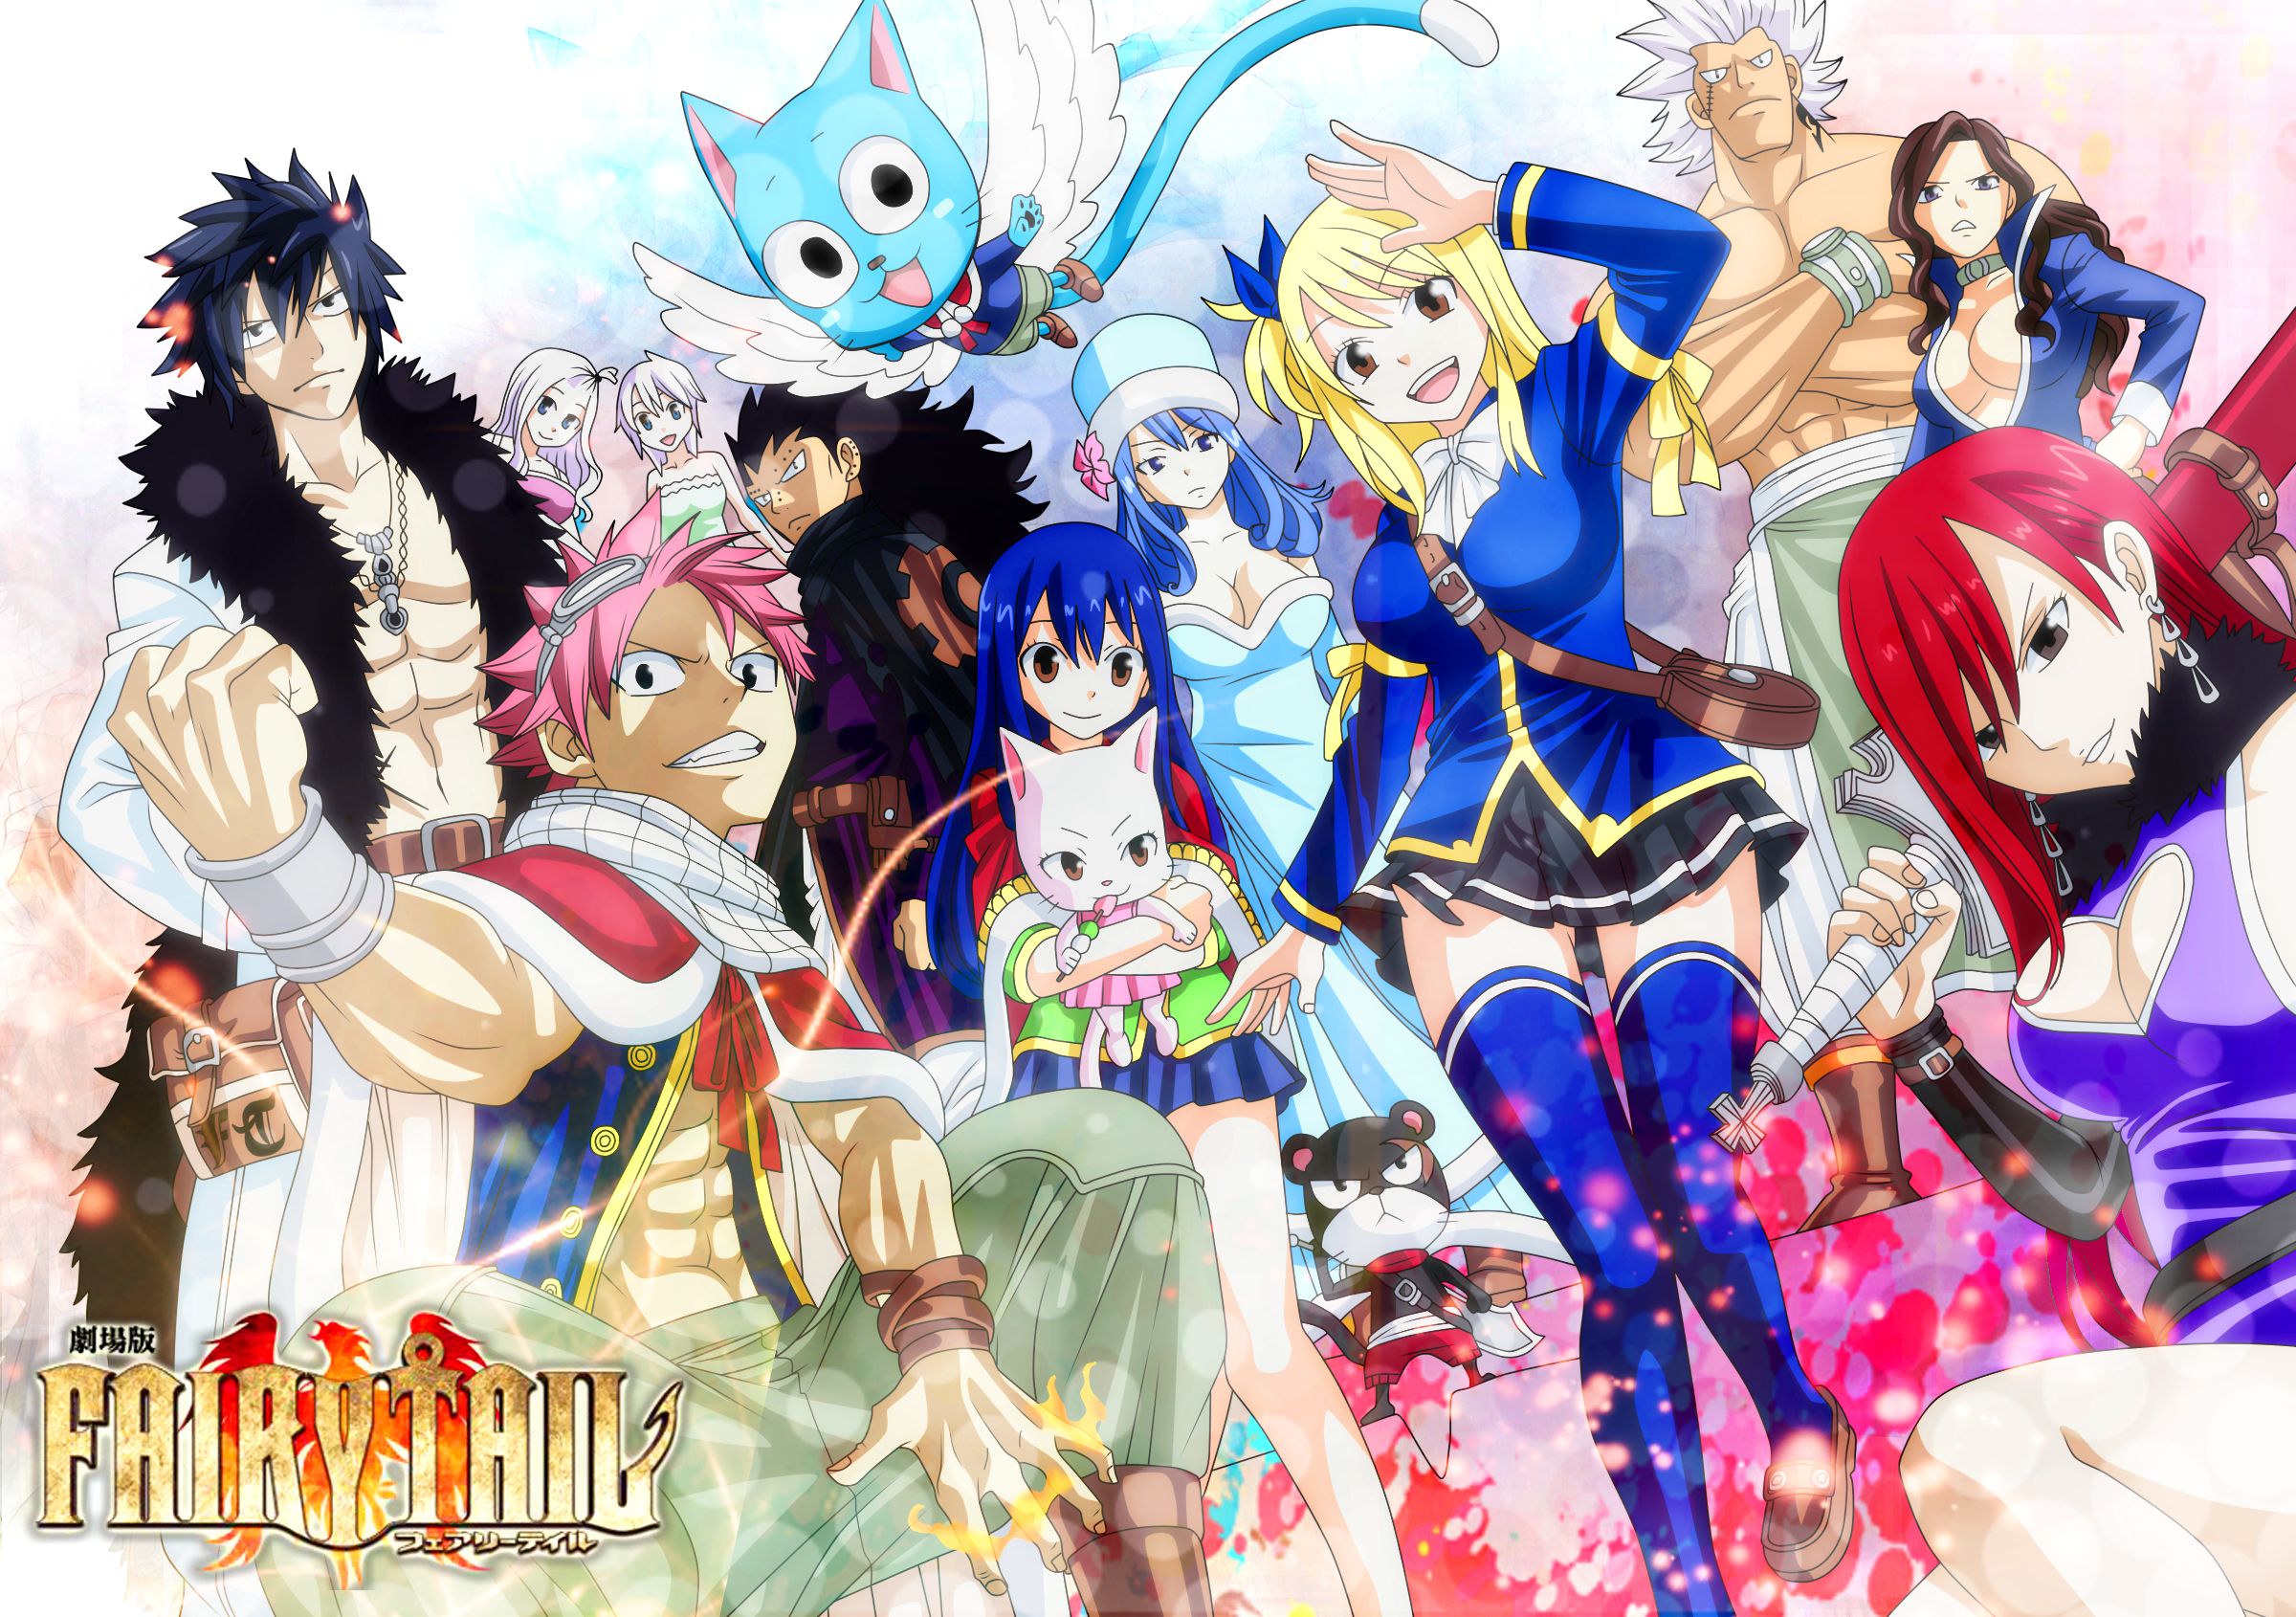 anime, fairy tail, cana alberona, charles (fairy tail), collar, earrings, elfman strauss, erza scarlet, gajeel redfox, gray fullbuster, happy (fairy tail), hat, juvia lockser, lisanna strauss, lucy heartfilia, mirajane strauss, natsu dragneel, panther lily (fairy tail), skirt, smile, sword, thigh highs, weapon, wendy marvell phone wallpaper